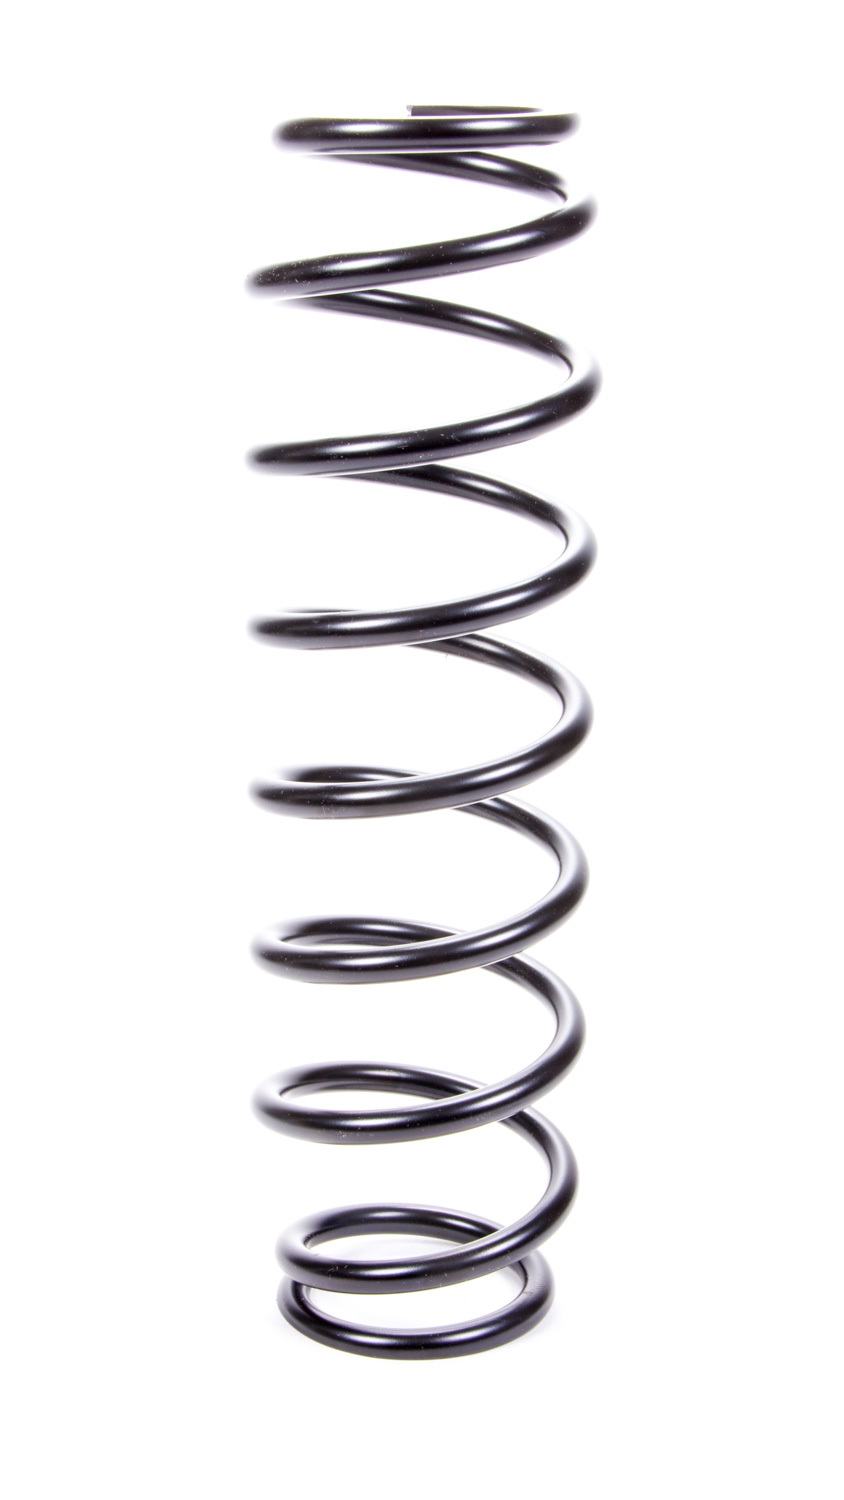 Swift Springs 120-250-250B Coil Spring, Barrel, Coil-Over, 2.500 in ID, 12.000 in Length, 250 lb/in Spring Rate, Steel, Black Powder Coat, Each